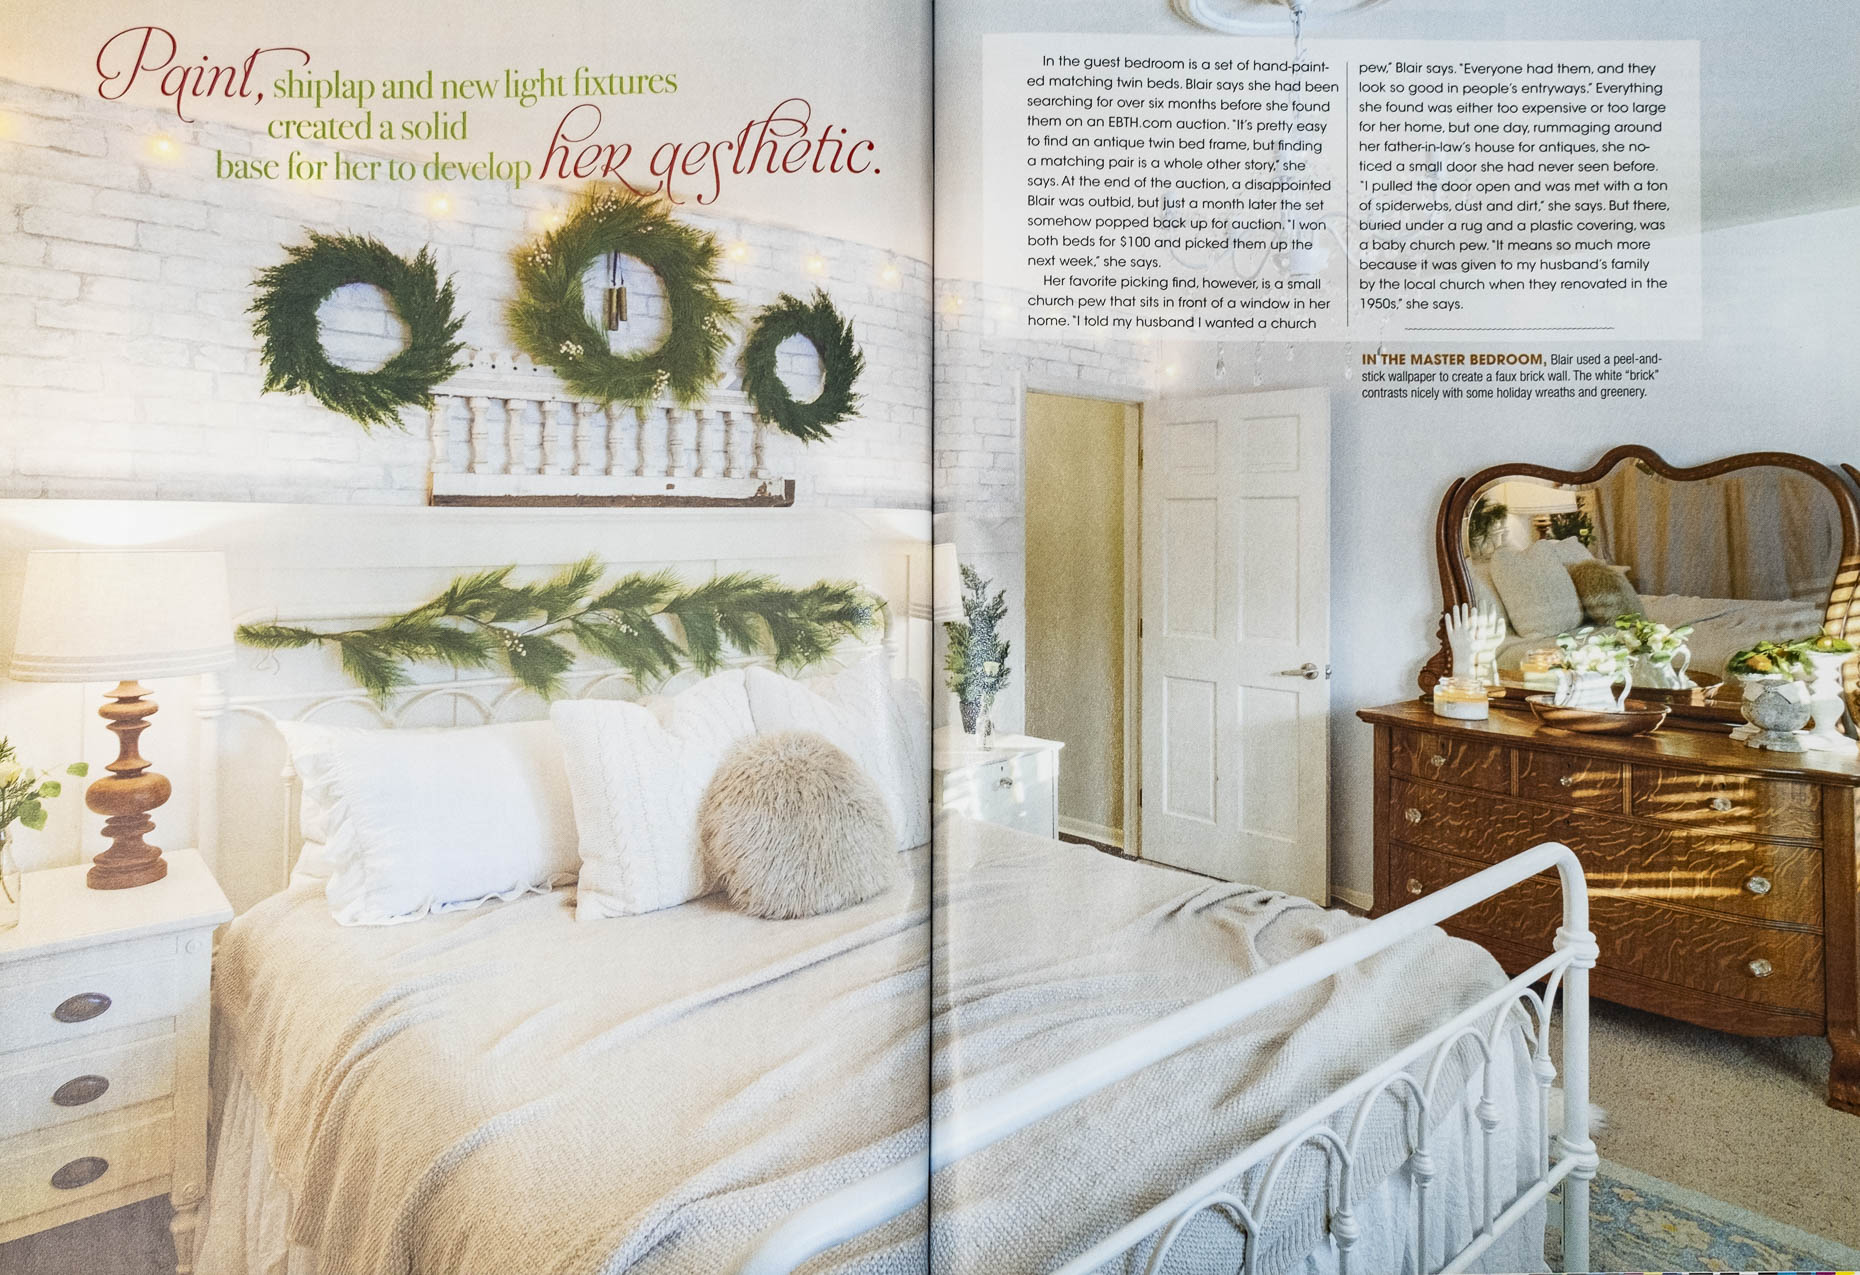 Tearsheets from Flea Market Decor 2020 Holiday Issue photographed by Lauren K Davis based in Columbus, Ohio